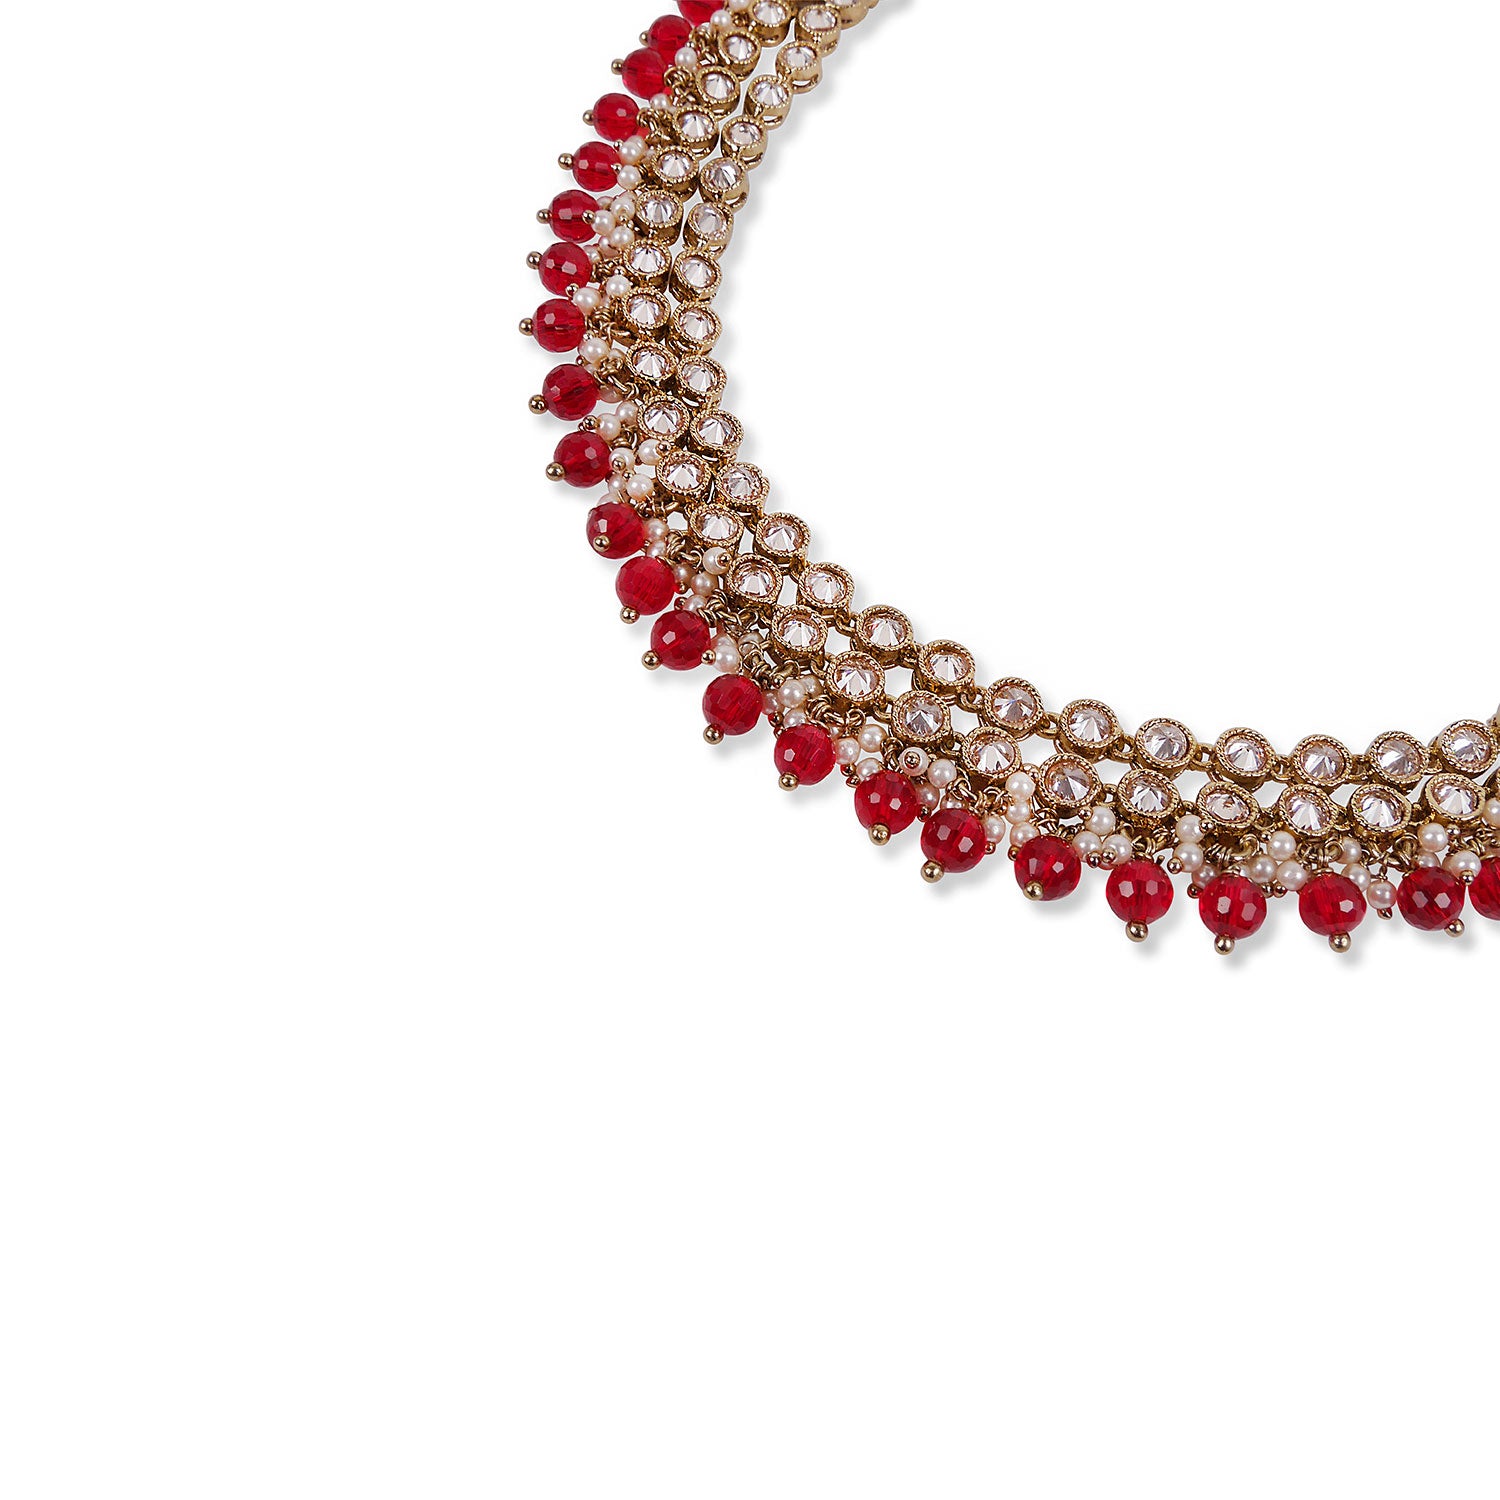 Freena Necklace in Maroon